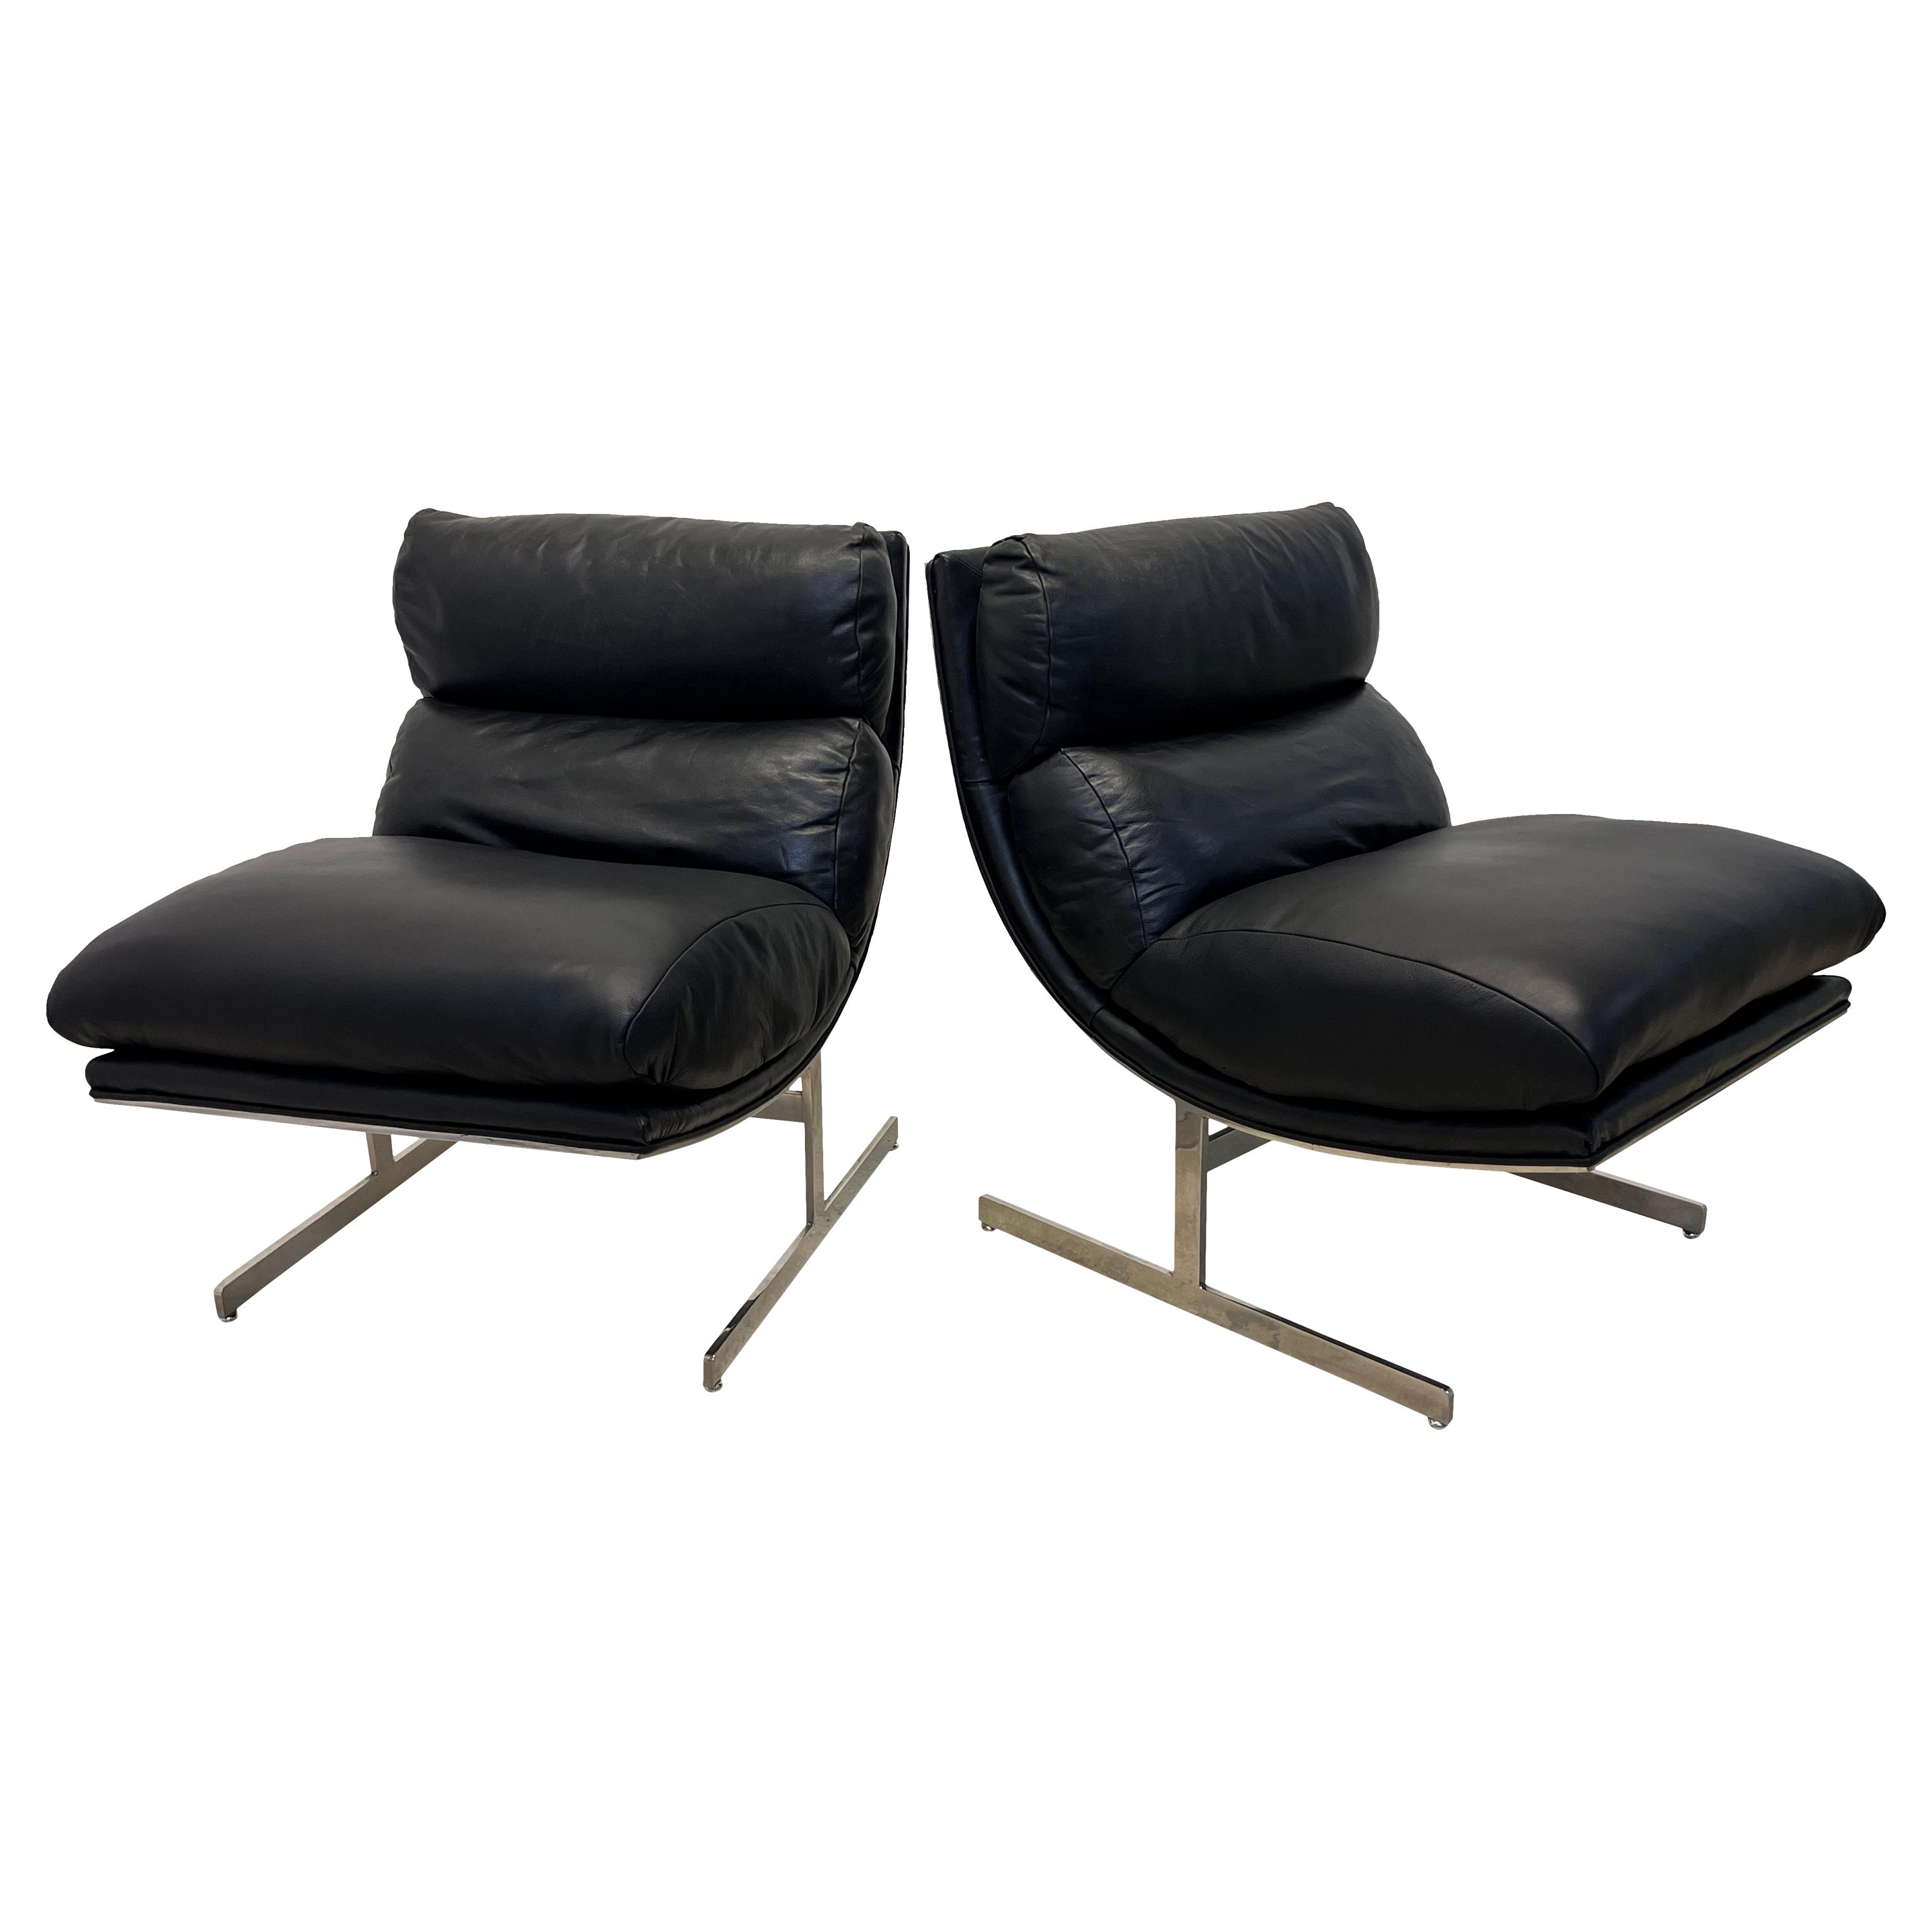 Kipp Stewart Black Leather and Chrome Arc Lounge Chairs for Directional - a Pair For Sale